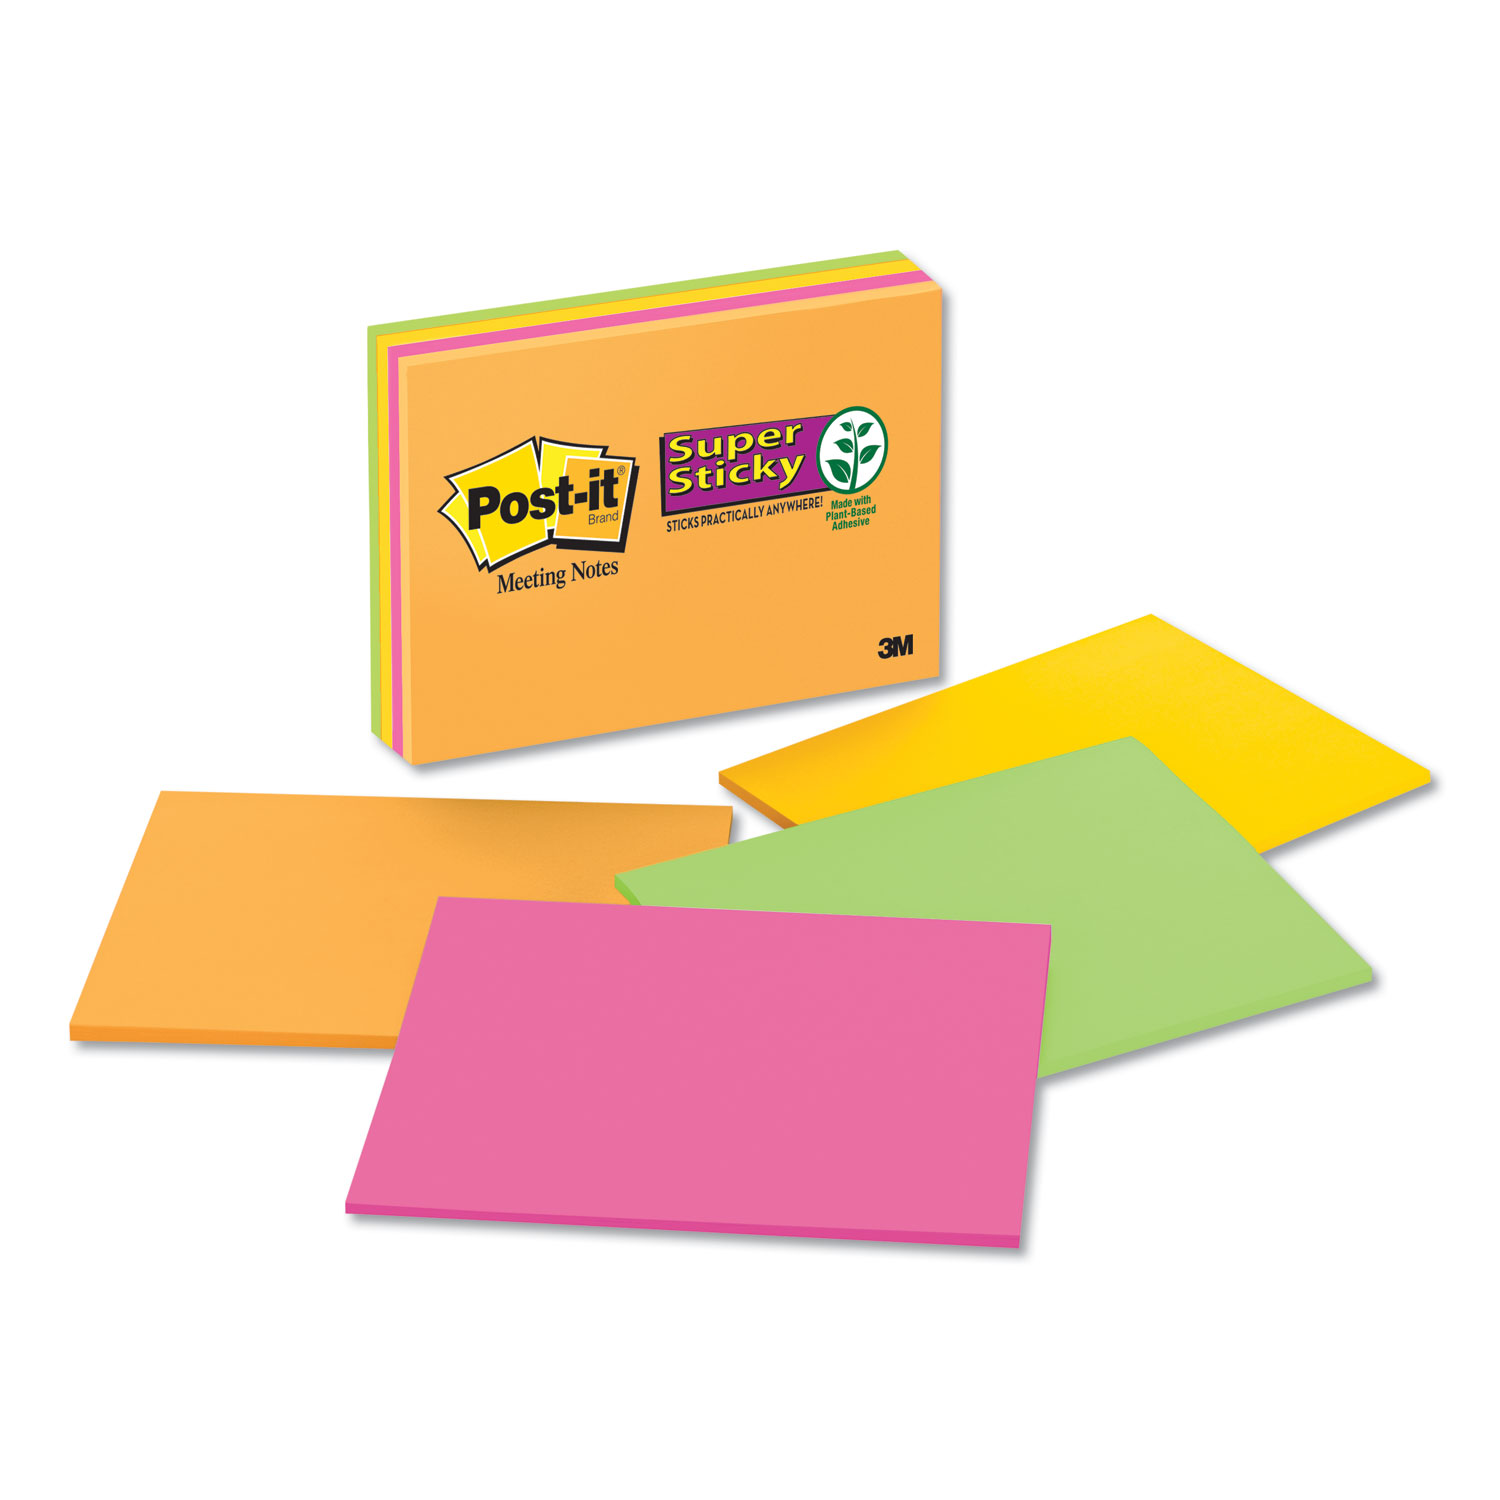  Post-it Notes Super Sticky 6845-SSP Super Sticky Meeting Notes in Rio de Janeiro Colors, 8 x 6, 45-Sheet, 4/Pack (MMM6845SSP) 